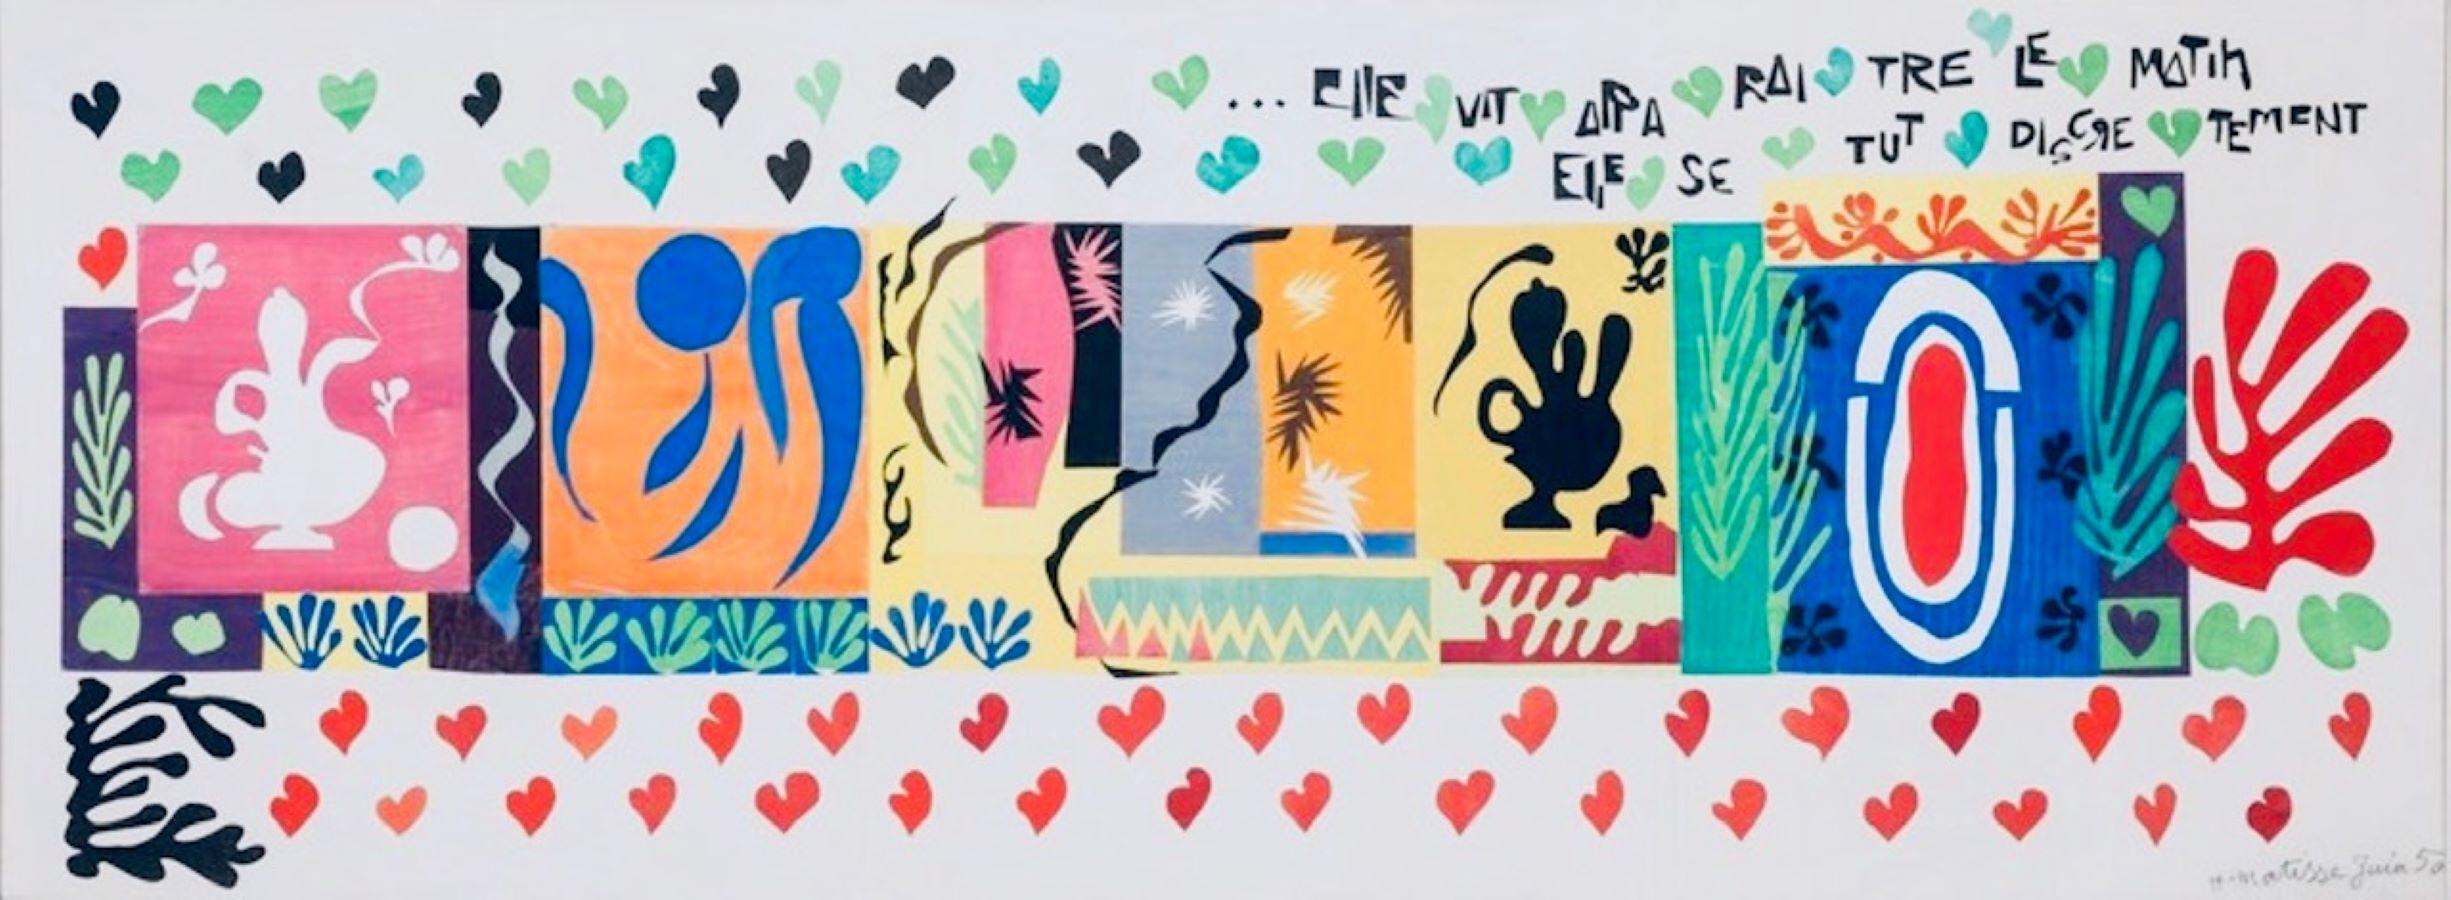 Henri Matisse Abstract Print - The Thousand And One Nights-3 Print Suite, Copyright 1984 Haddad's Fine Arts